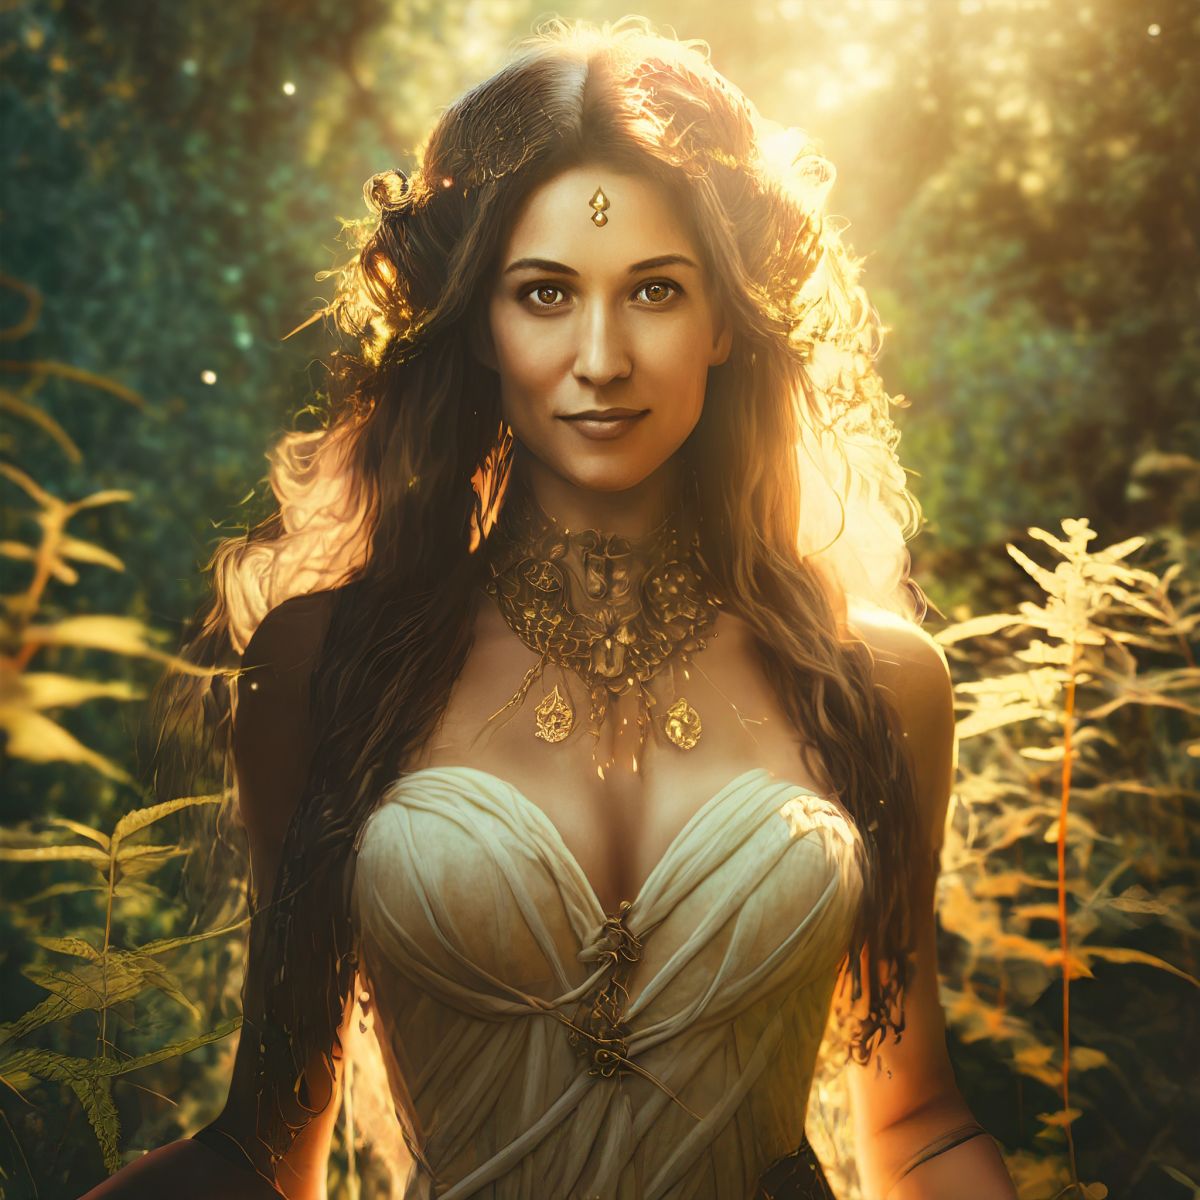 Wyrd Moirai: The Goddess of Allotment, Fate, and Destiny. A casual portrait of her on Earth. Image generated by Adobe Firefly.